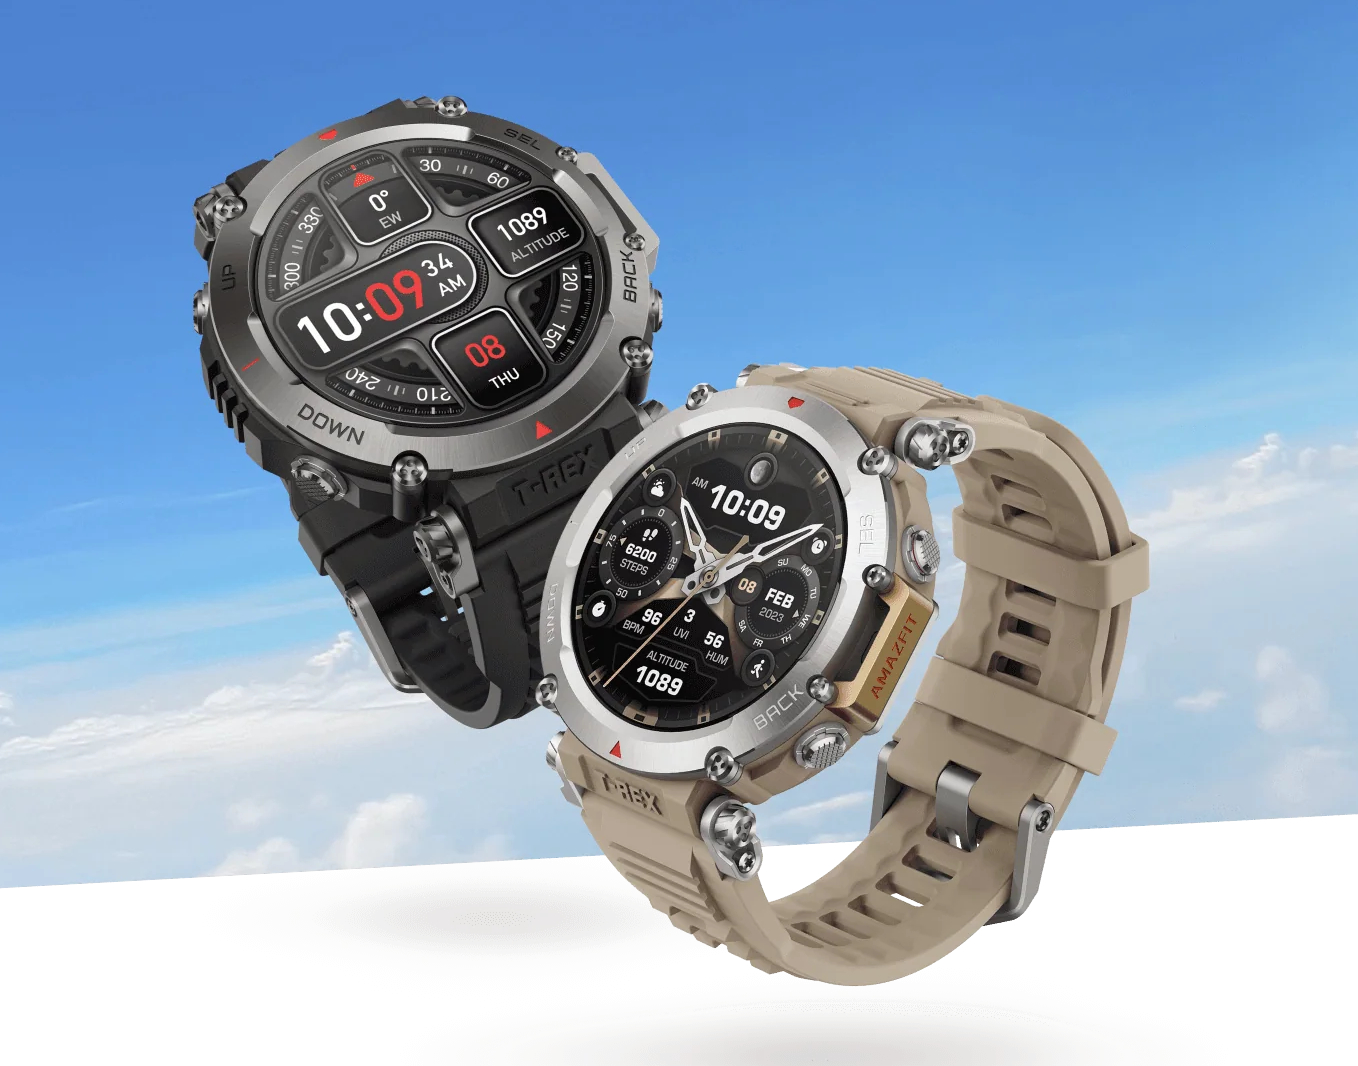 Amazfit T-Rex Ultra debuts as new high-end smartwatch